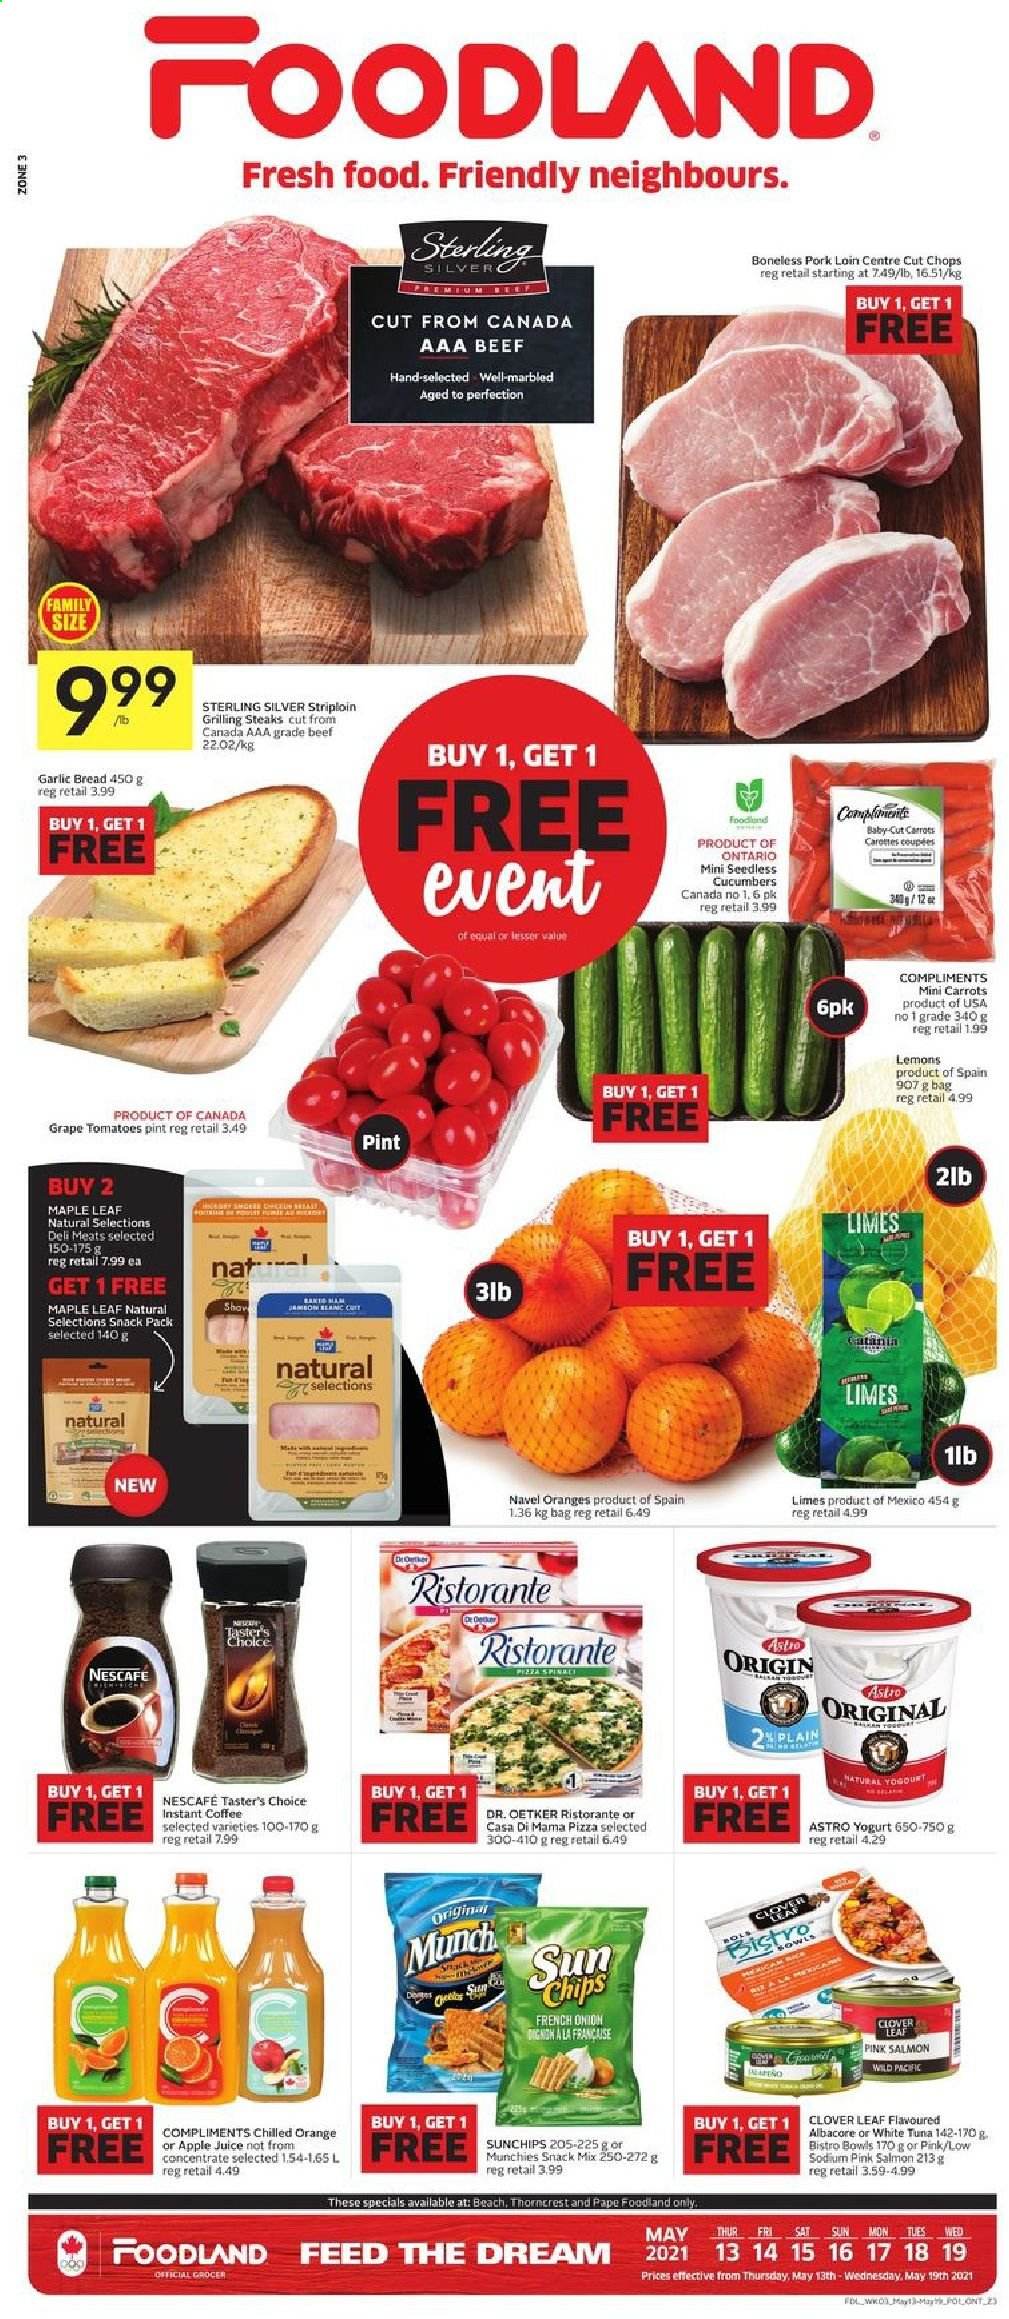 thumbnail - Foodland Flyer - May 13, 2021 - May 19, 2021 - Sales products - bread, carrots, cucumber, onion, limes, lemons, navel oranges, salmon, tuna, pizza, Dr. Oetker, yoghurt, Clover, apple juice, juice, instant coffee, pork loin, pork meat, chips, steak, Nescafé. Page 1.